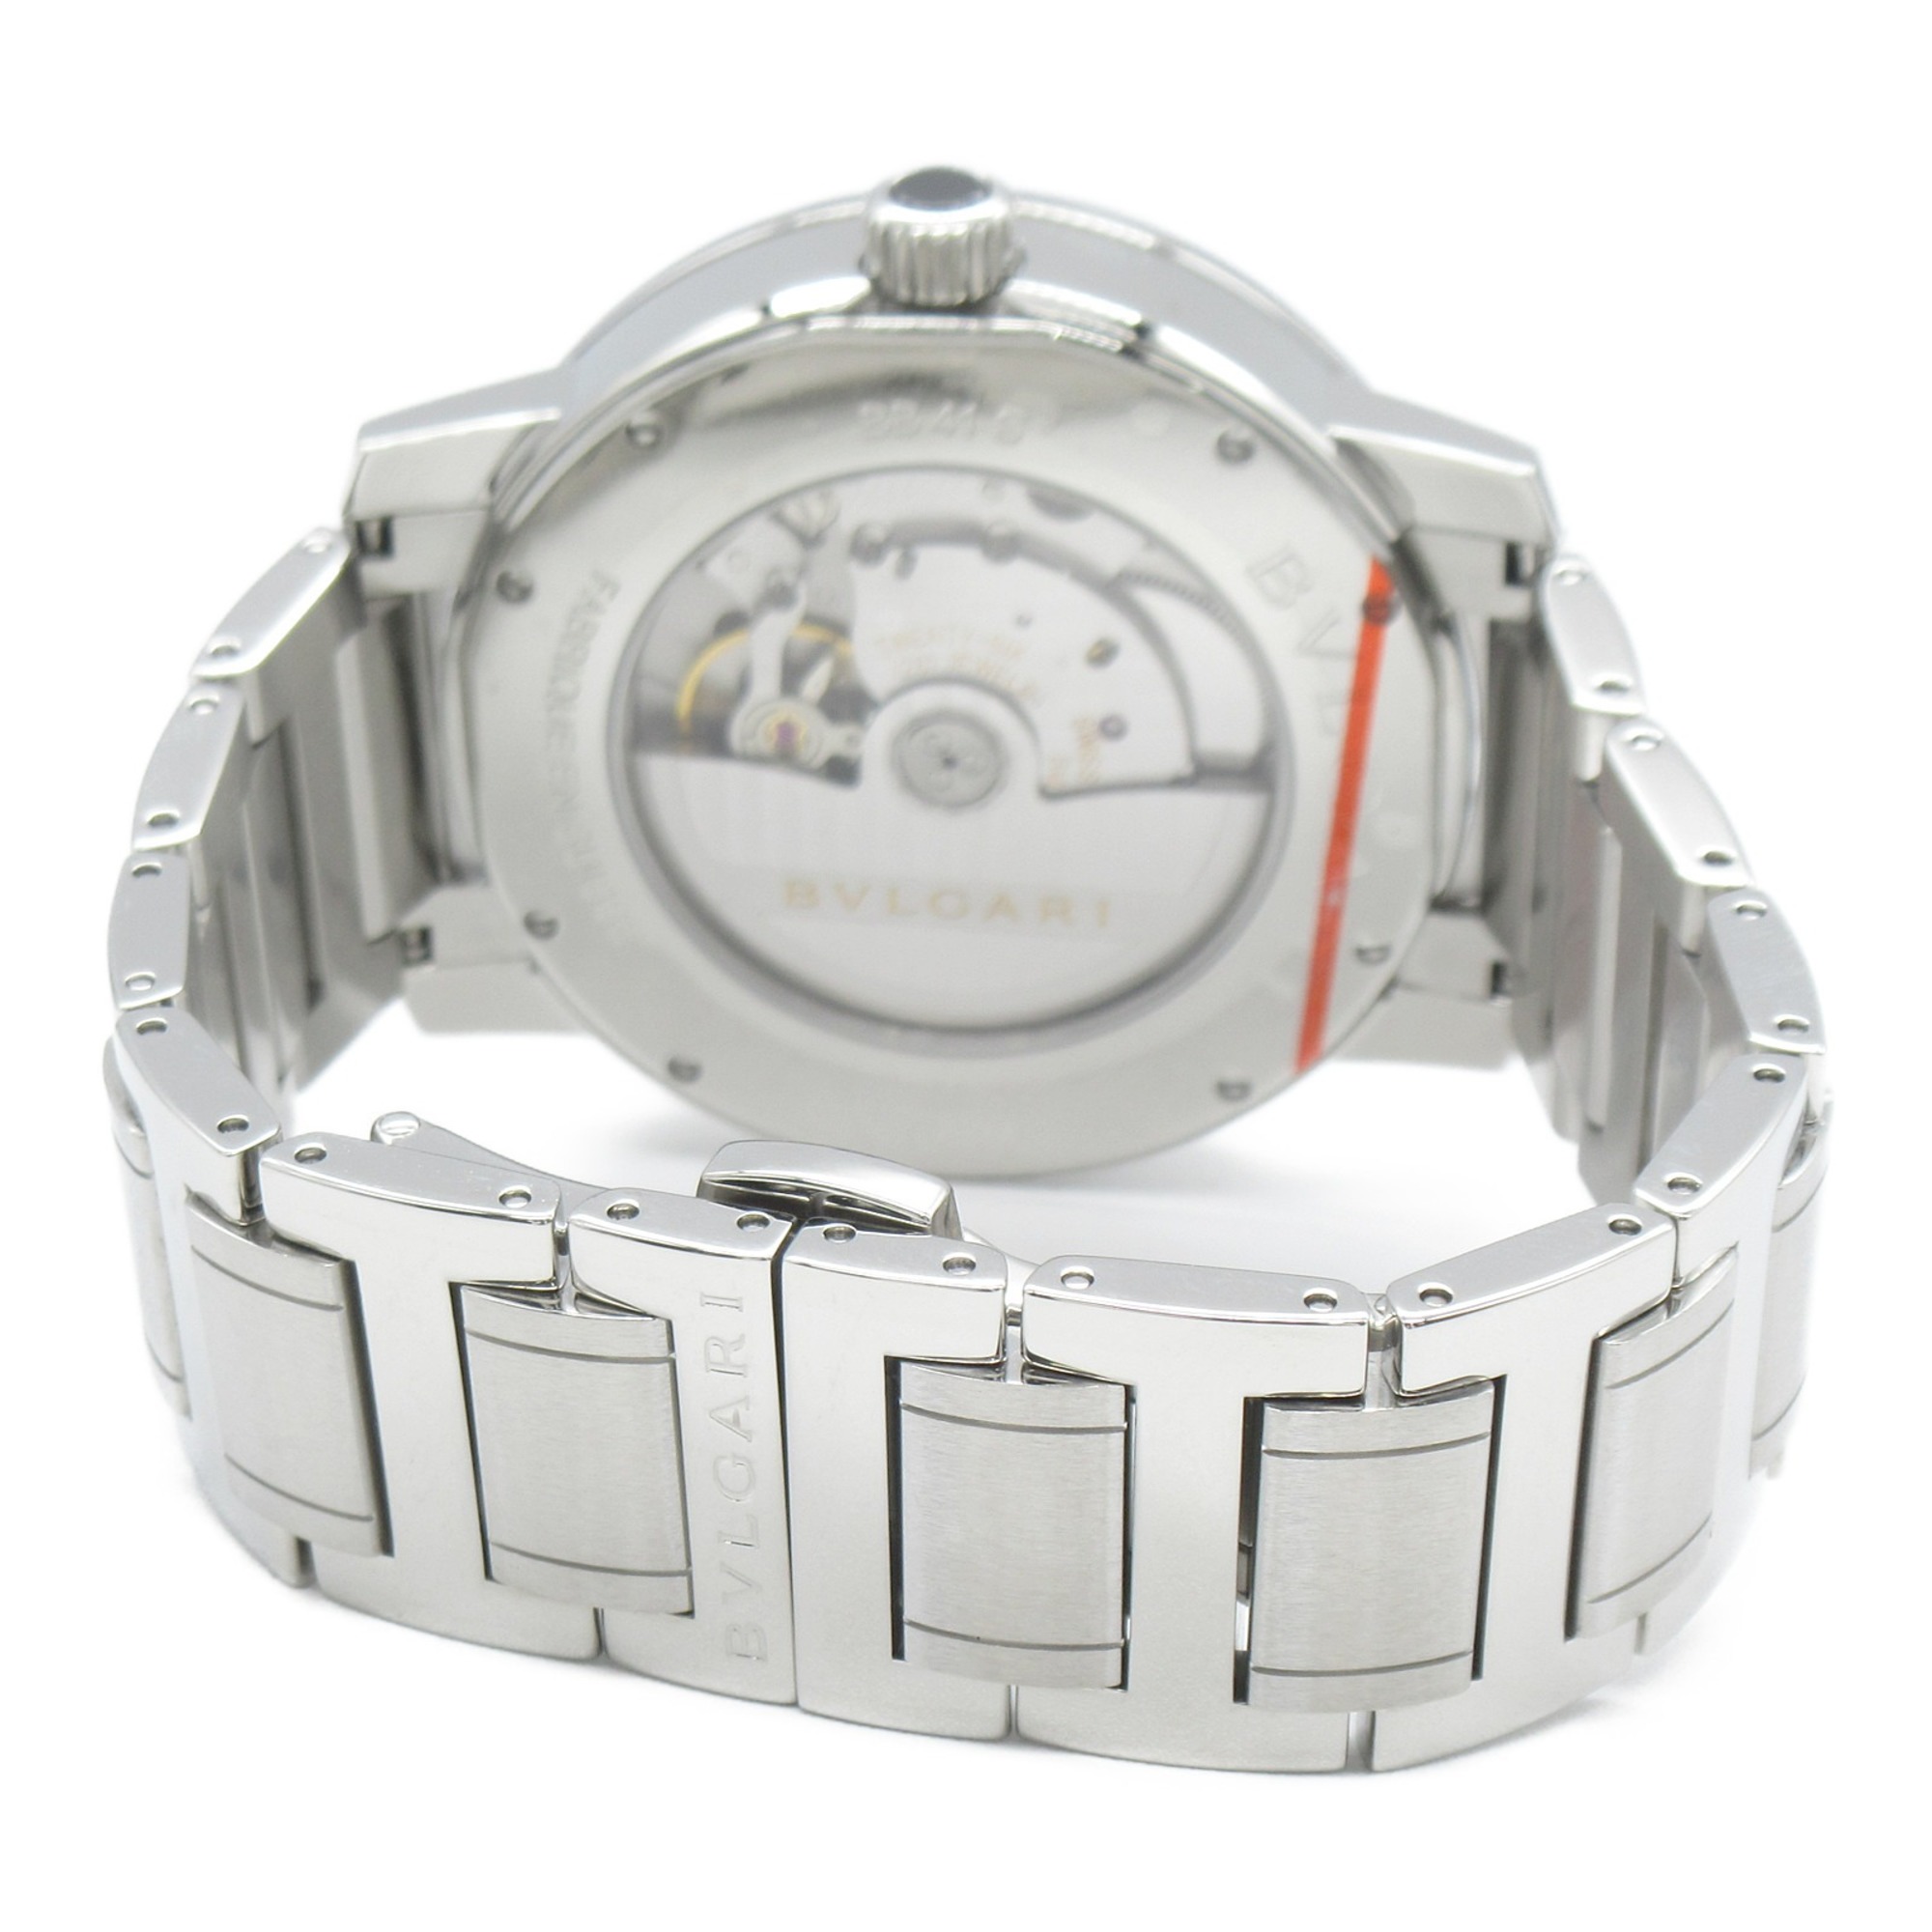 BVLGARI Bvlgari Bvlgari Wrist Watch Watch Wrist Watch BB41S Mechanical Automatic White  Stainless Steel BB41S